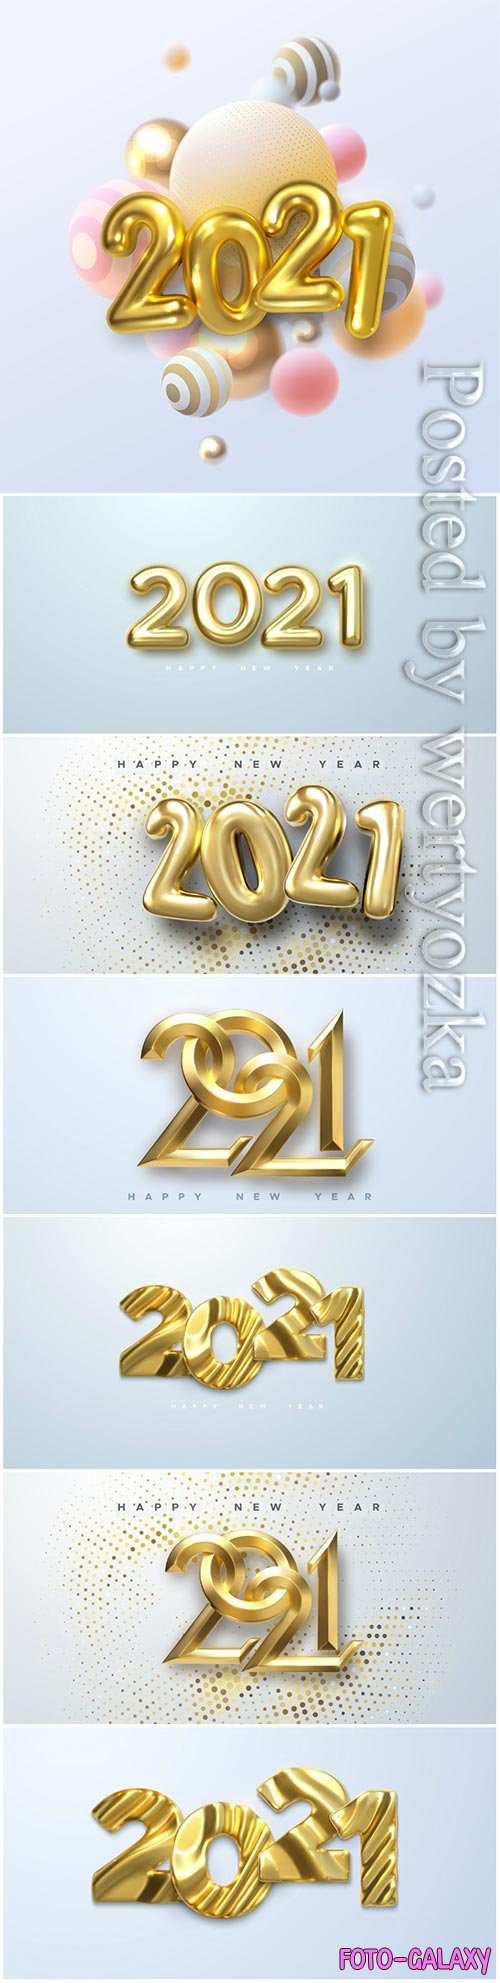 Gold numbers 2021 for new year illustration